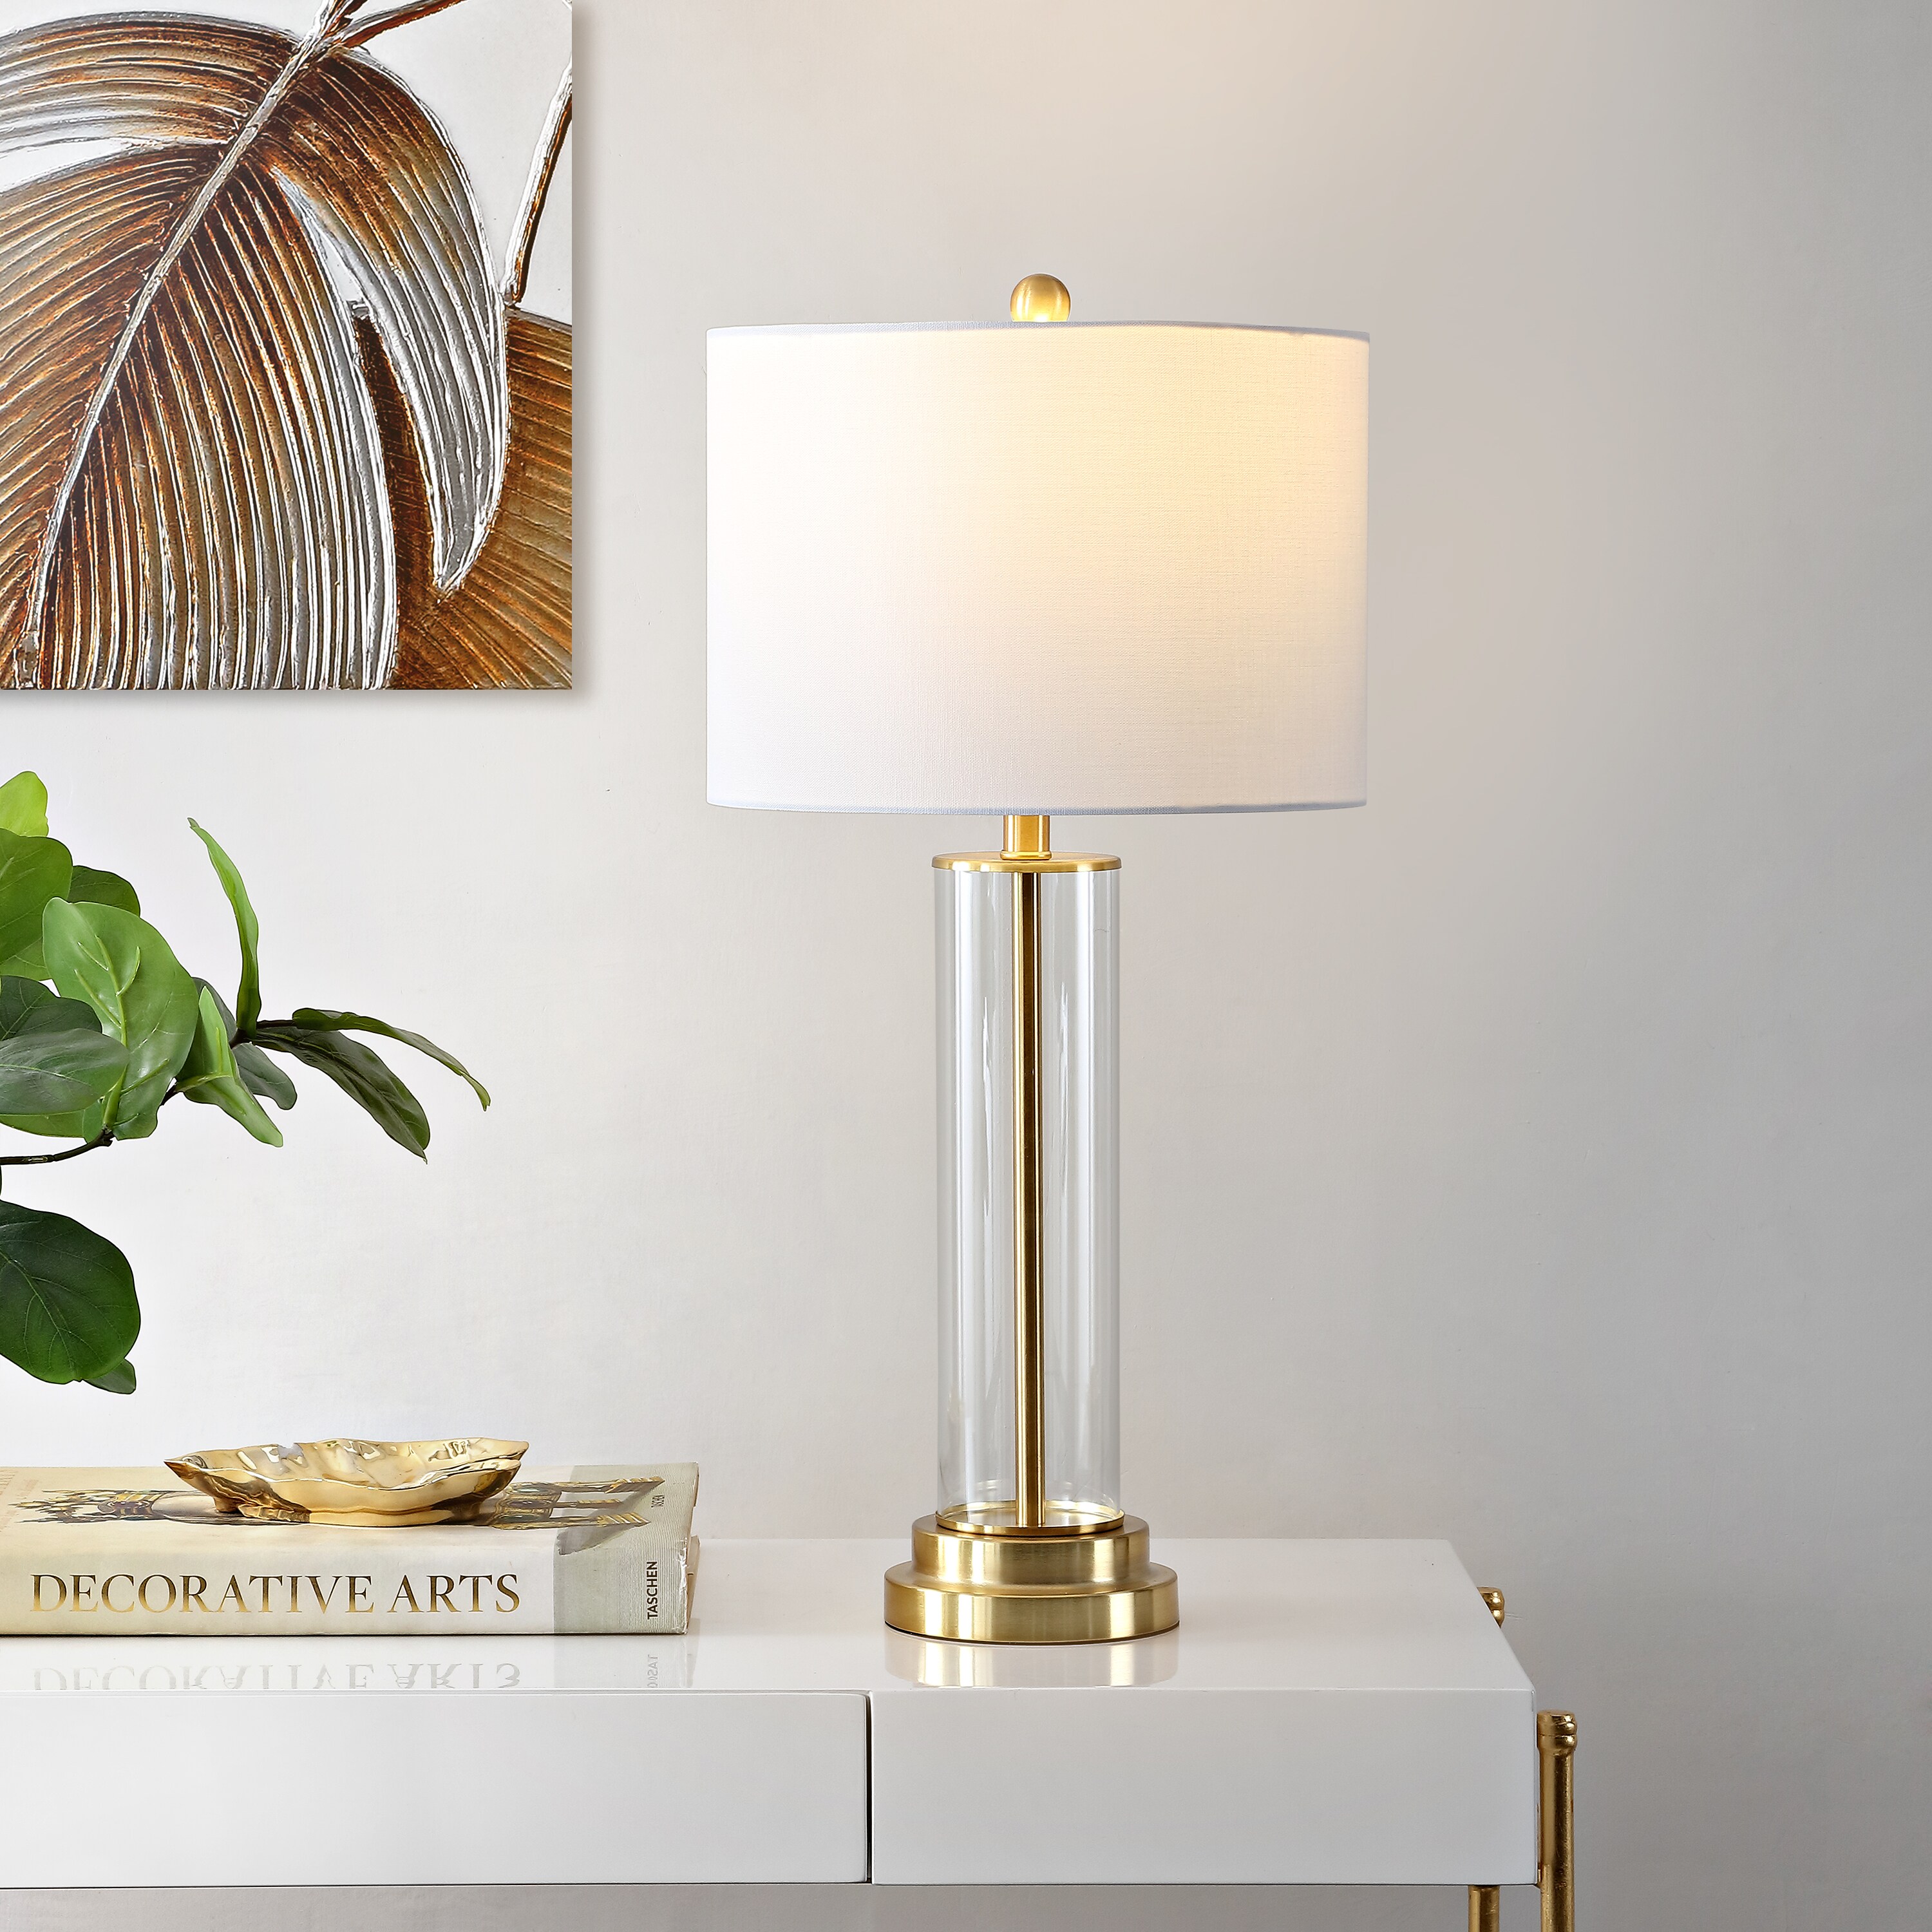 Safavieh Cassian Clear LED Table Lamp with Fabric Shade at Lowes.com